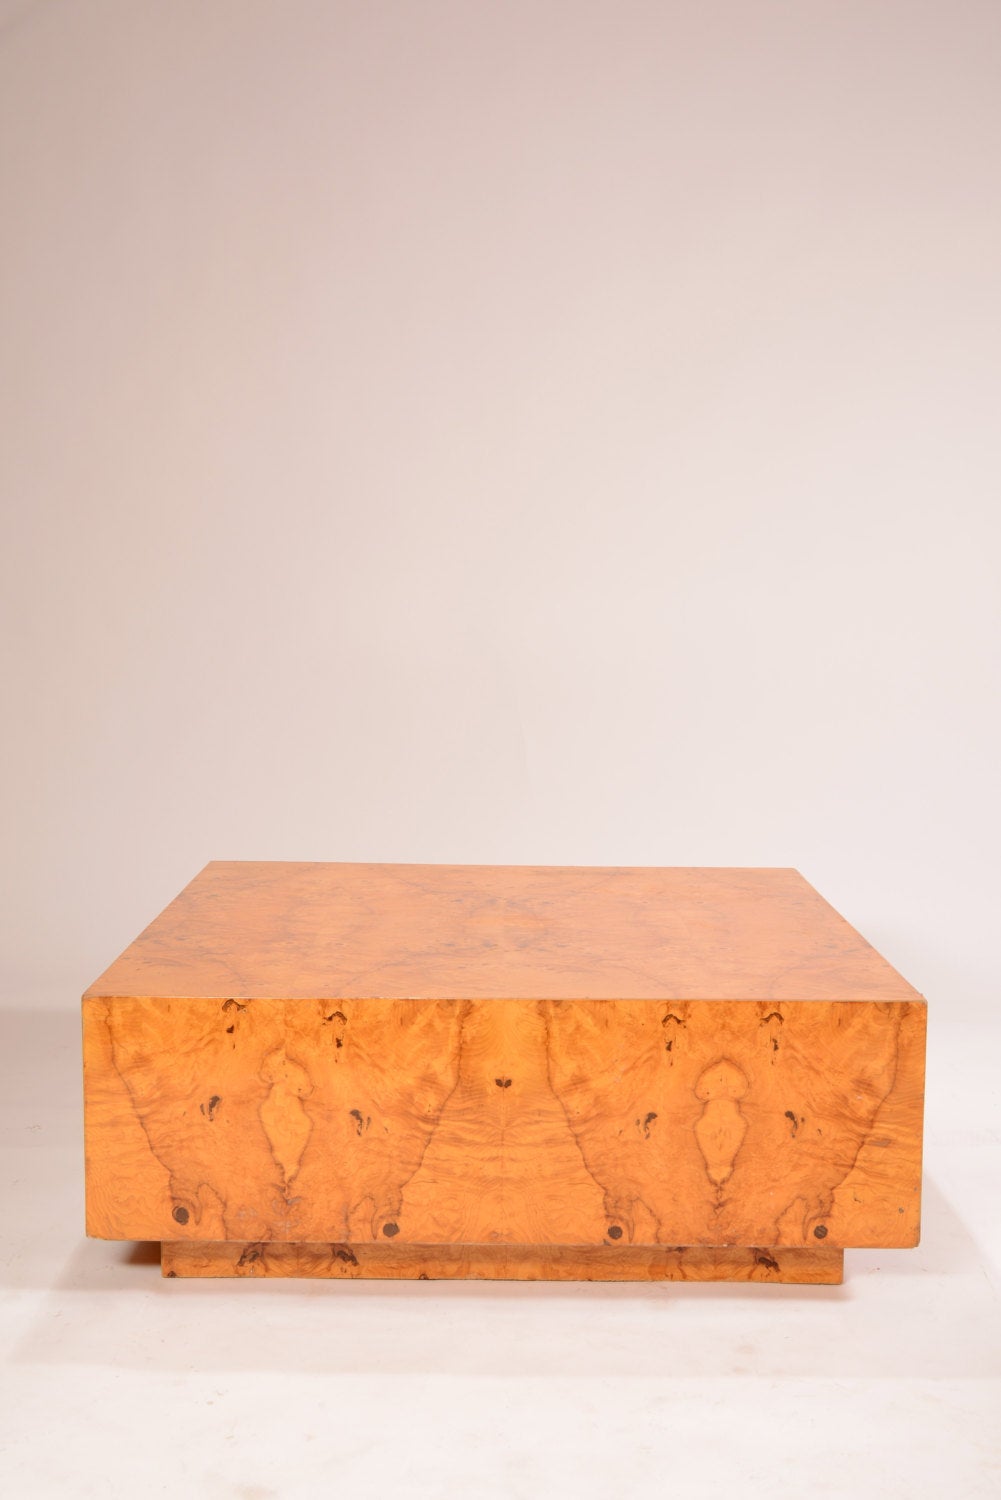 Burl Olive Coffee Table by Milo Baughman. We also have the matching end tables. Please see the separate listing.
This table retains its original finish. Re-finishing is available.  

Local pick up is available at our Los Angeles showroom.